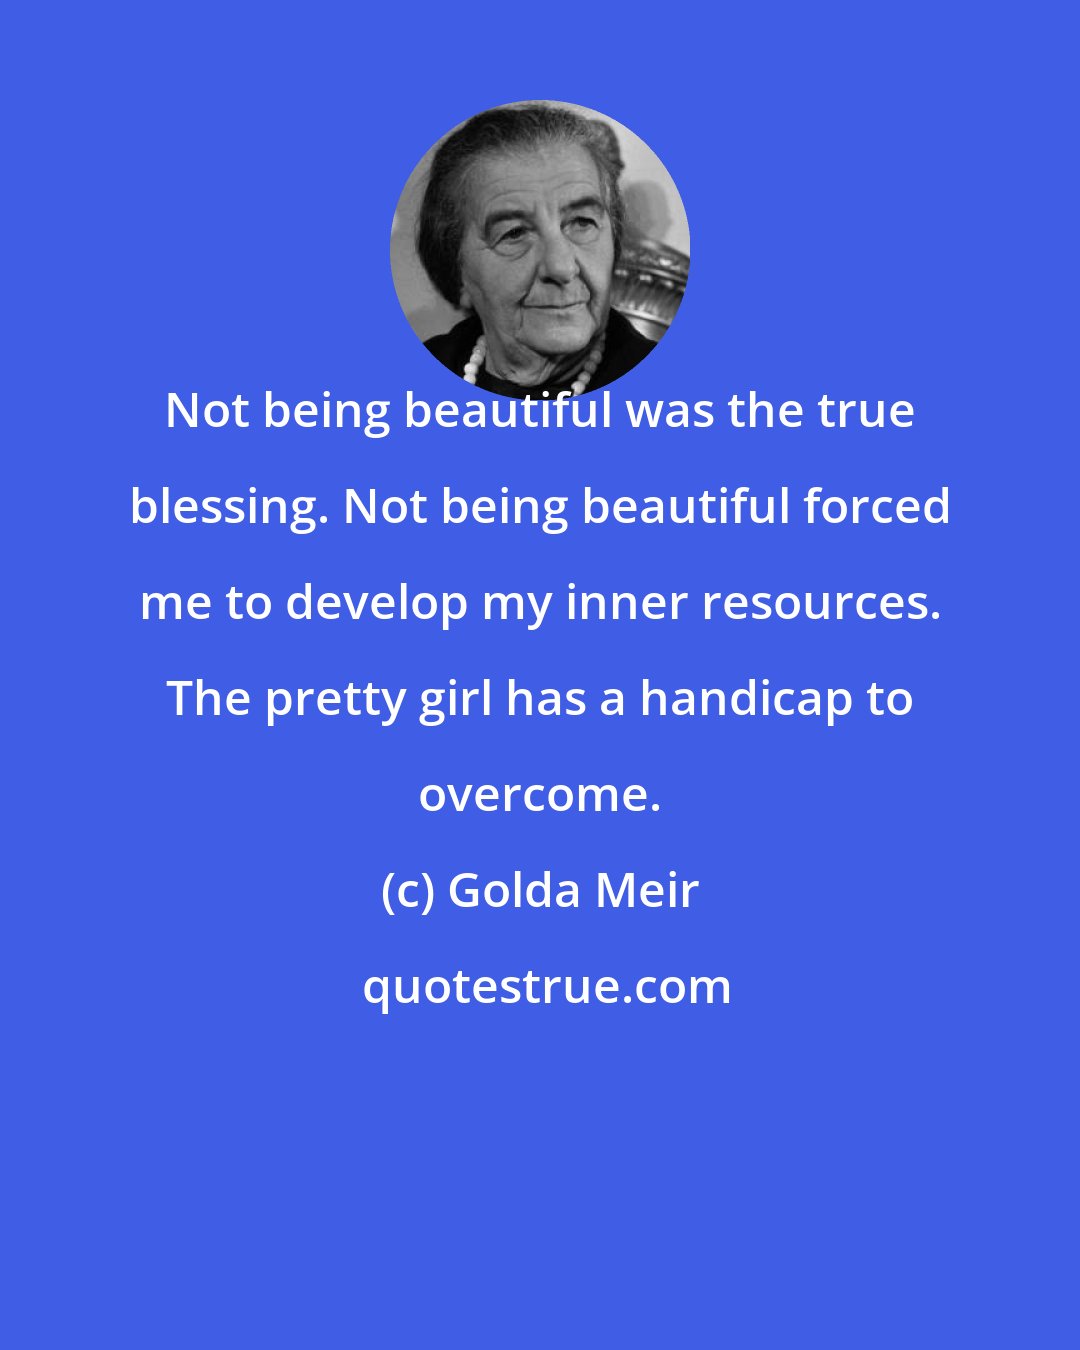 Golda Meir: Not being beautiful was the true blessing. Not being beautiful forced me to develop my inner resources. The pretty girl has a handicap to overcome.